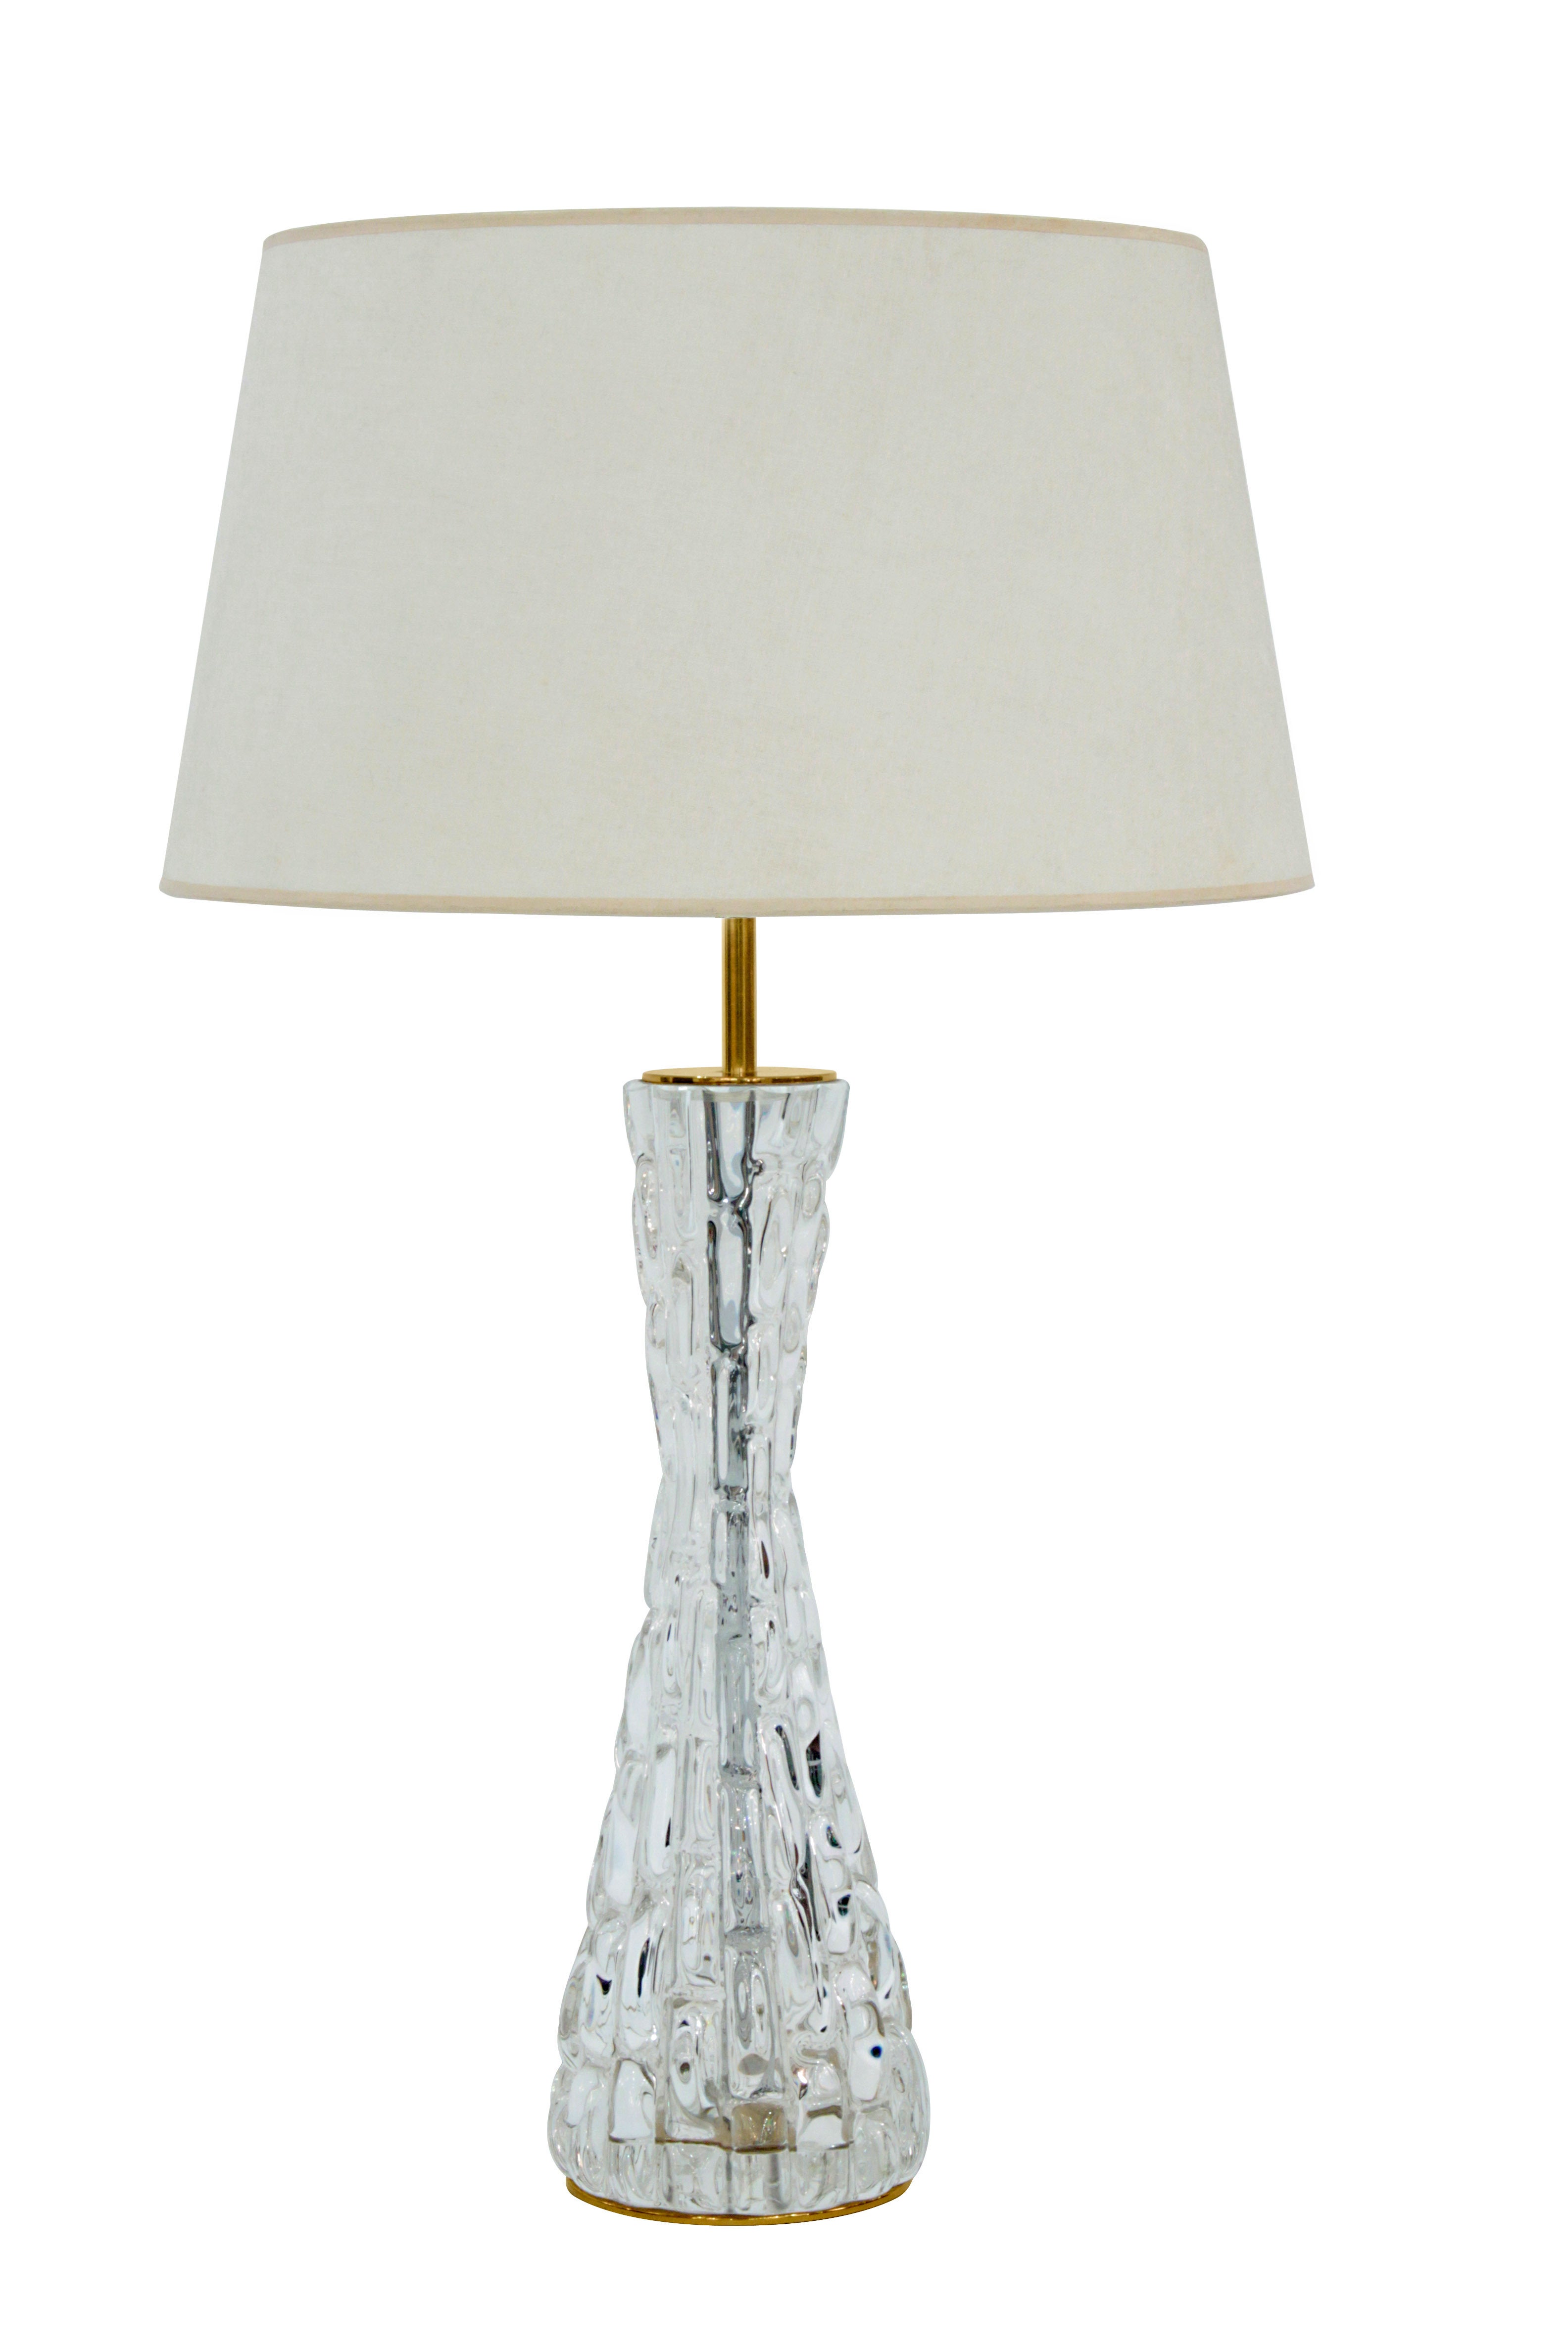 Sculptural Table Lamp with Glass by Carl Fagerlund for Orrefors